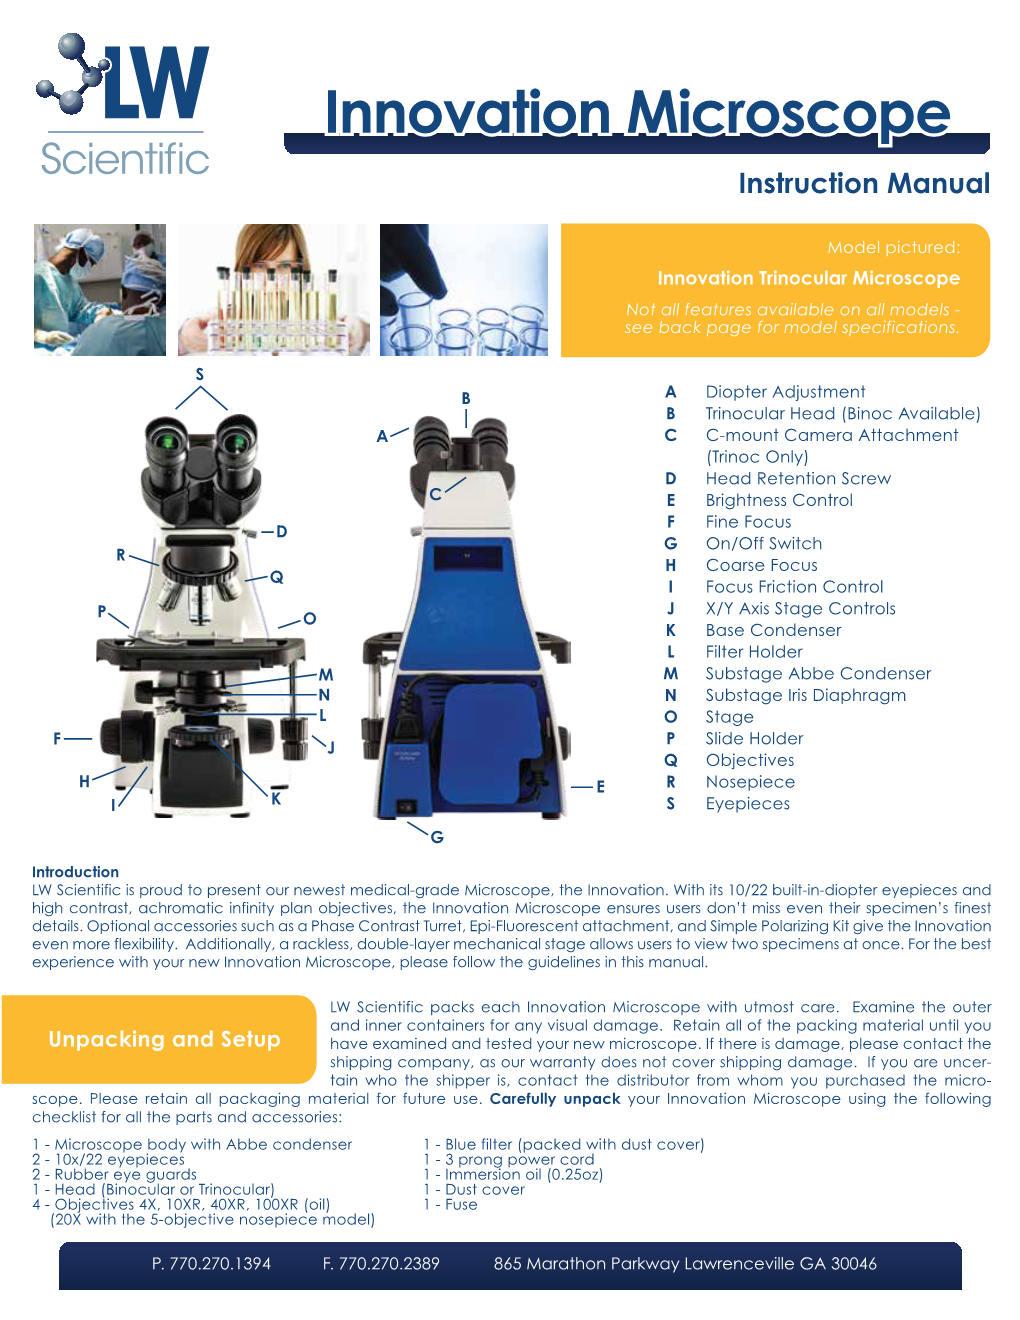 MKT-7.5.3-L-199 Innovation Microscope Manual for Email